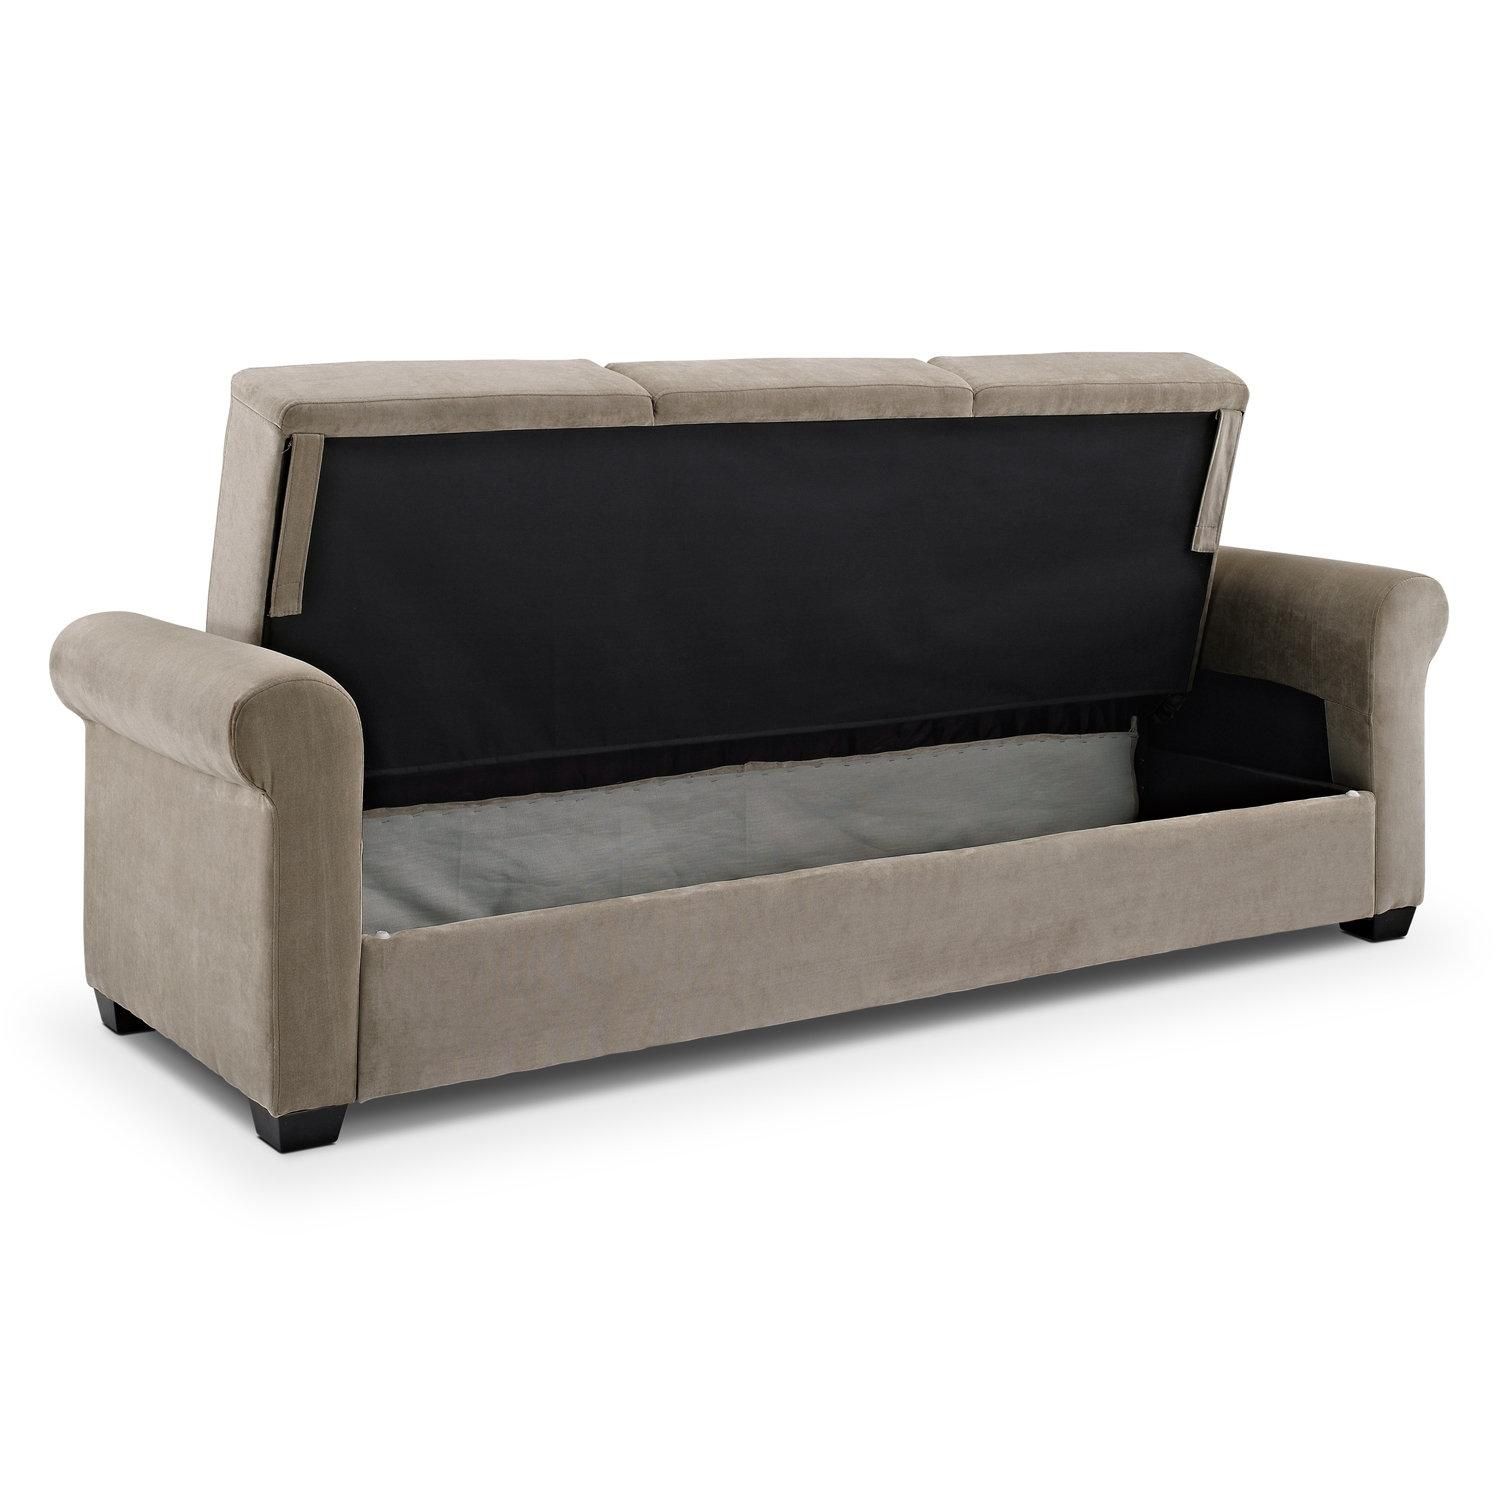 Euro Lounger Sofa Bed | Sofa Gallery | Kengire For Euro Lounger Sofa Beds (View 12 of 20)